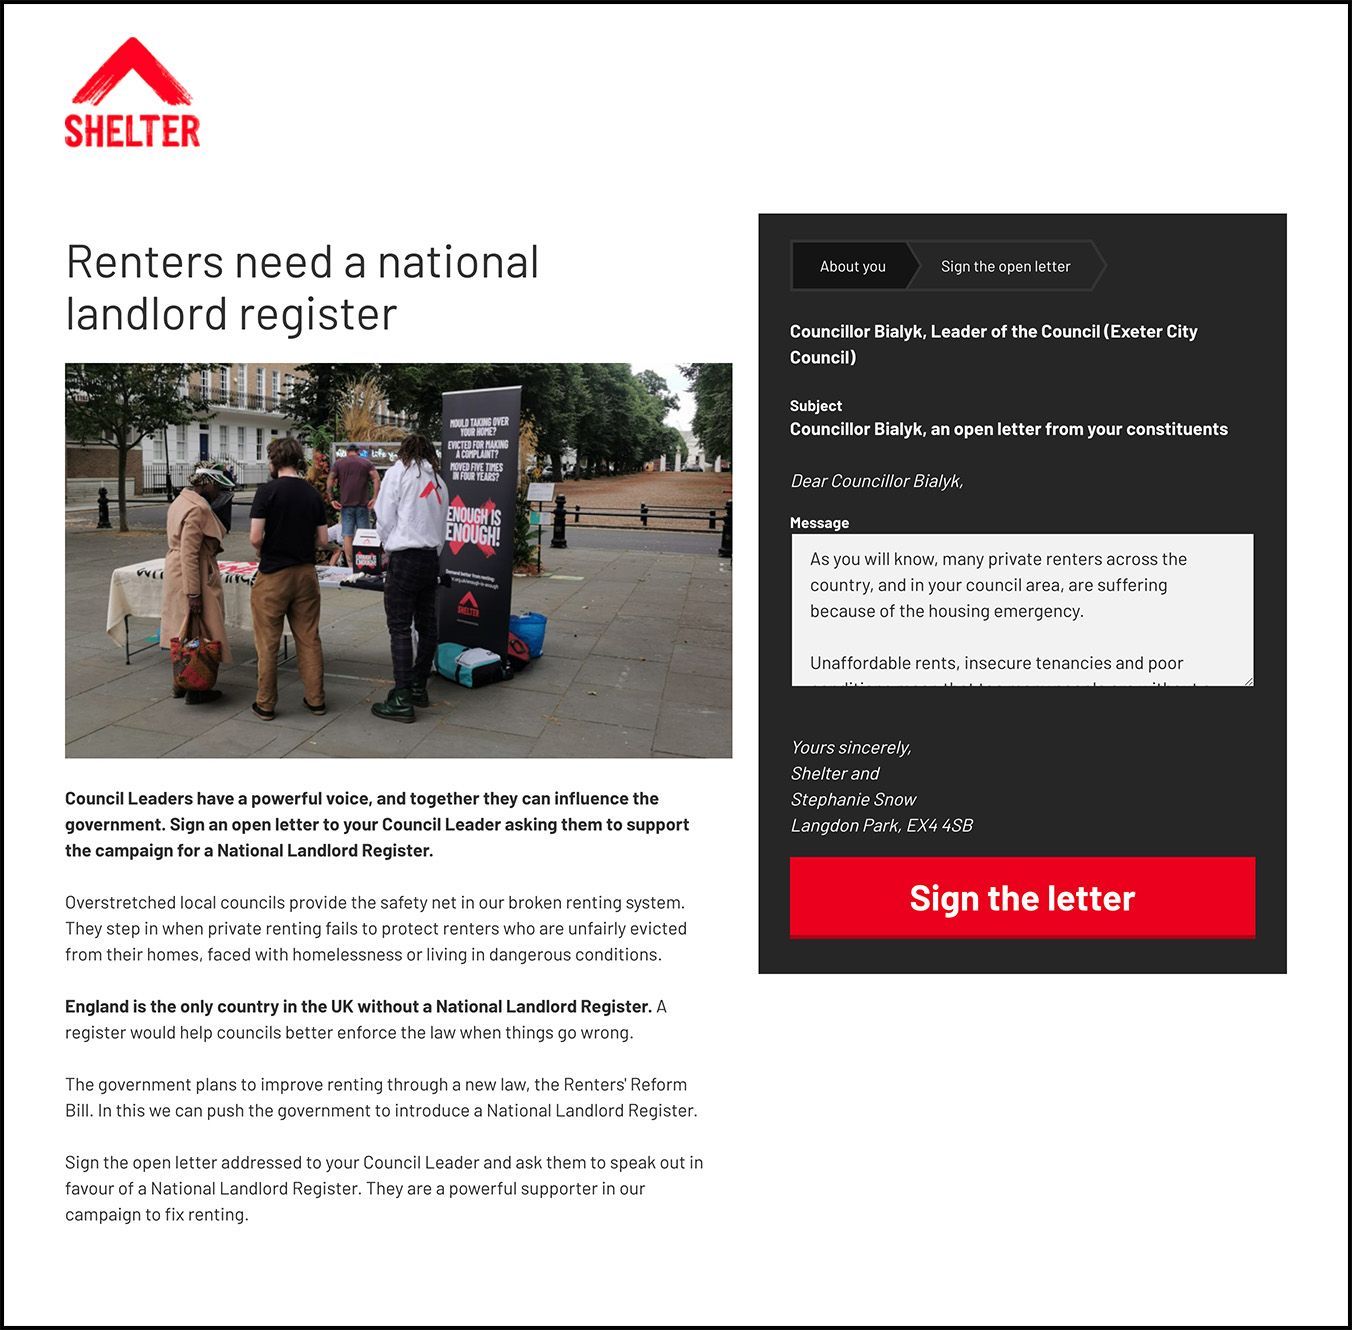 Shelter: targeting Councils on renters’ rights